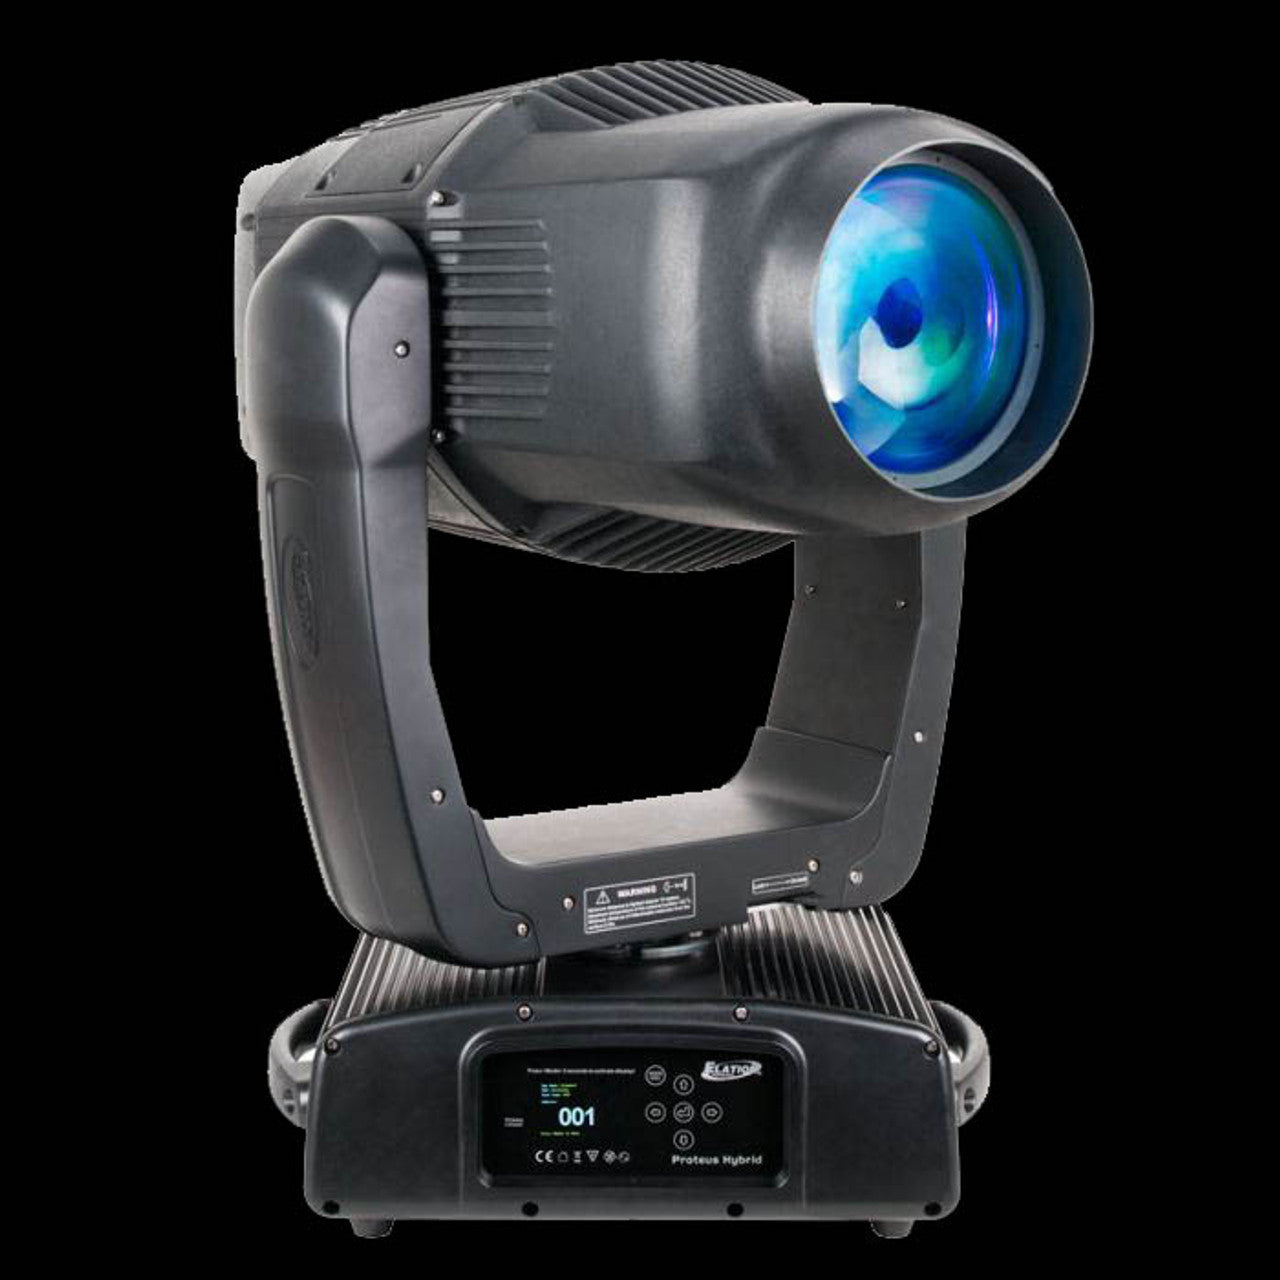 Elation Proteus Hybrid 470W Discharge IP65 Rated Hybrid Moving Head Fixture in Case